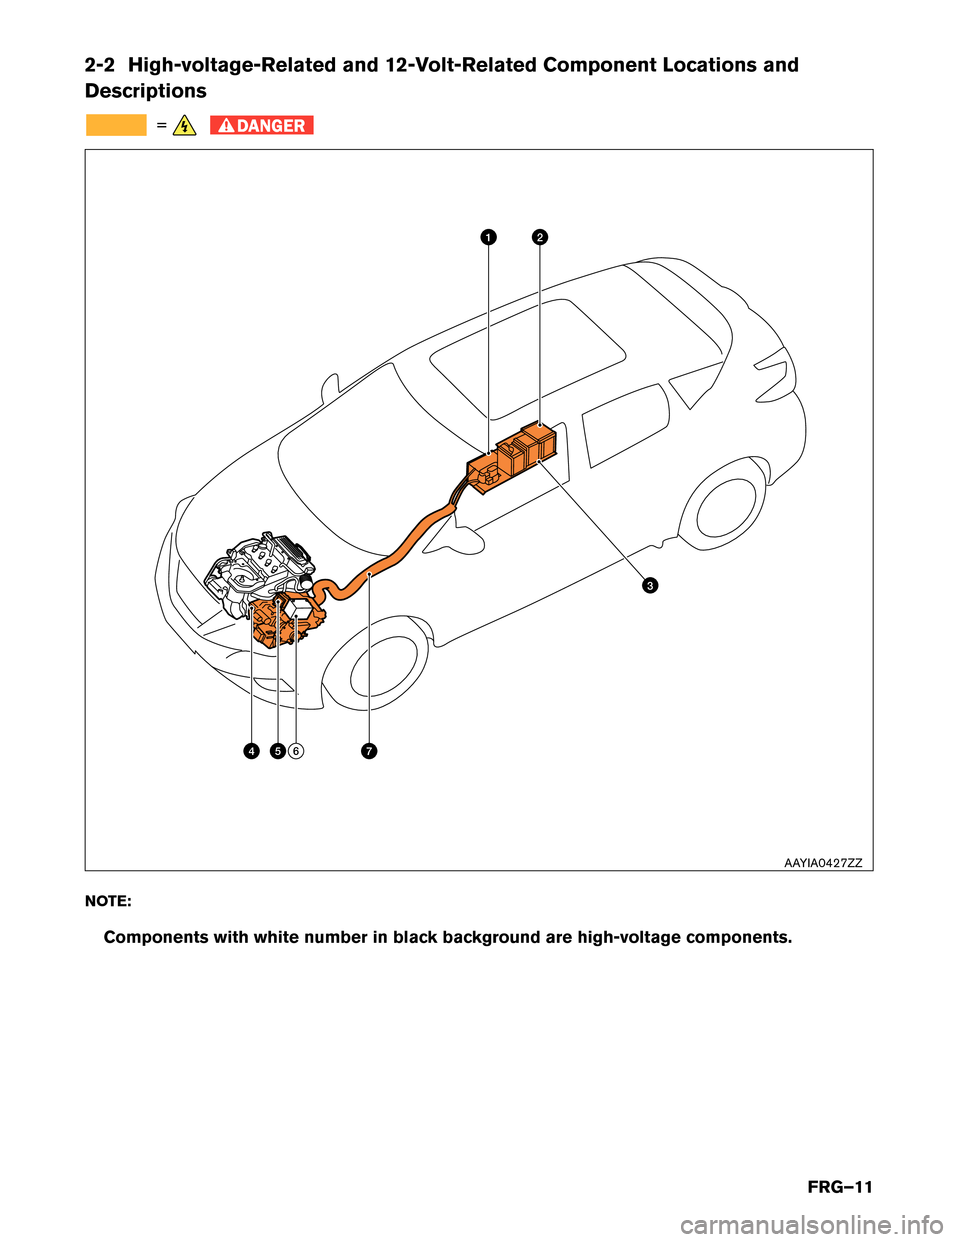 NISSAN MURANO HYBRID 2016 3.G First Responders Guide 2-2 High-voltage-Related and 12-Volt-Related Component Locations and
Descriptions
=
DANGER
NOTE:
Components with white number in black background are high-voltage components. 5 74 6 2
31
AAYIA0427ZZ
F